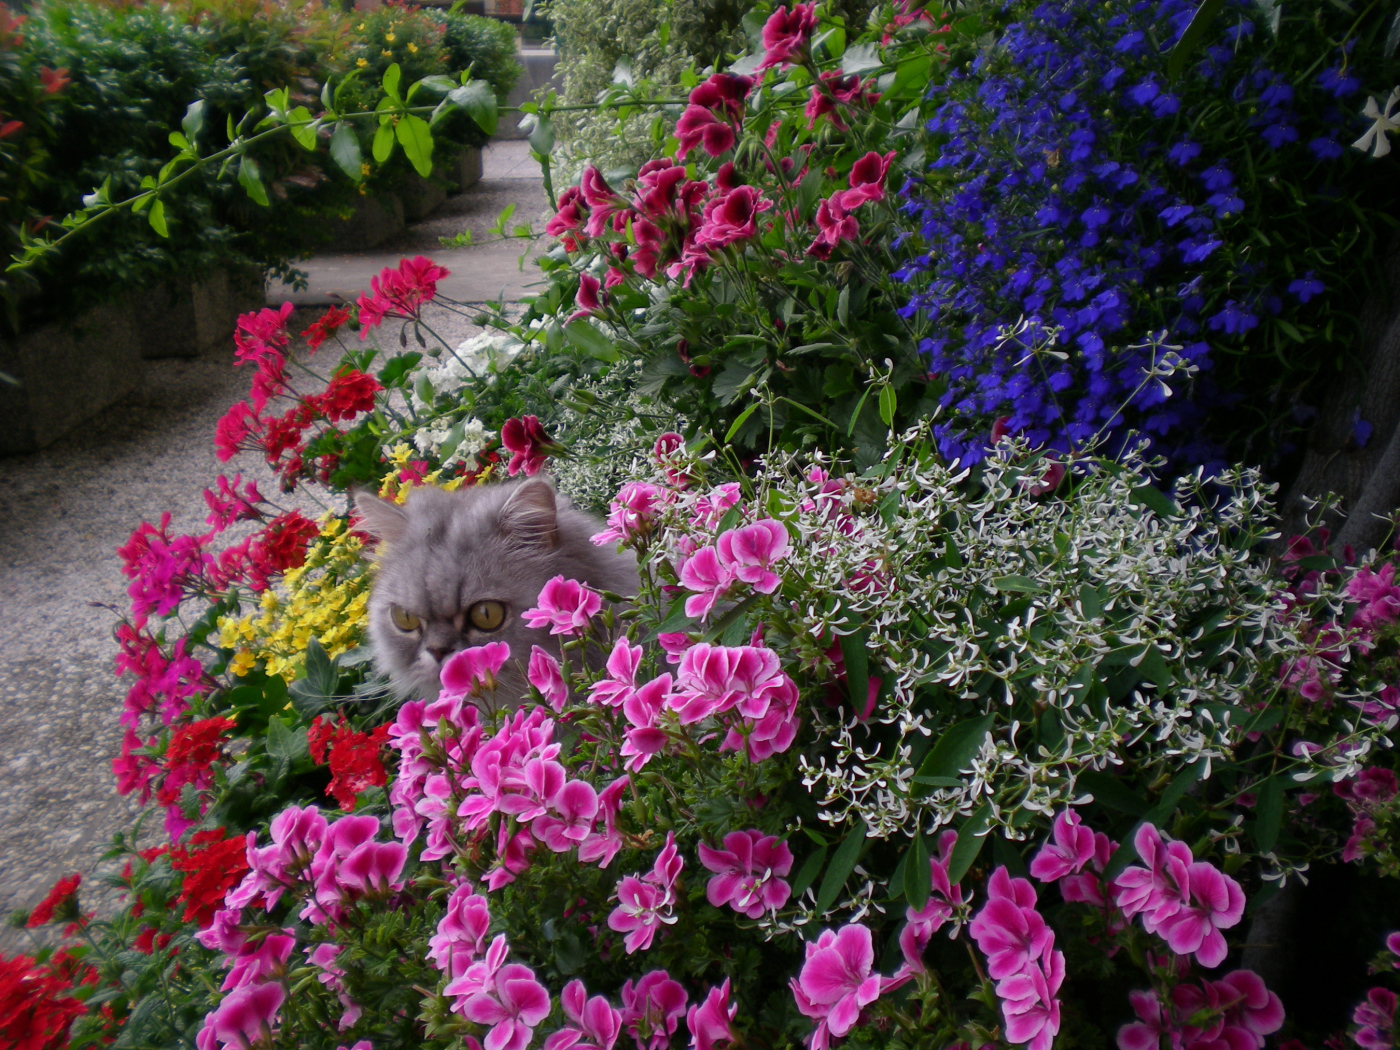 A gray cat hides in the colors of geraniums